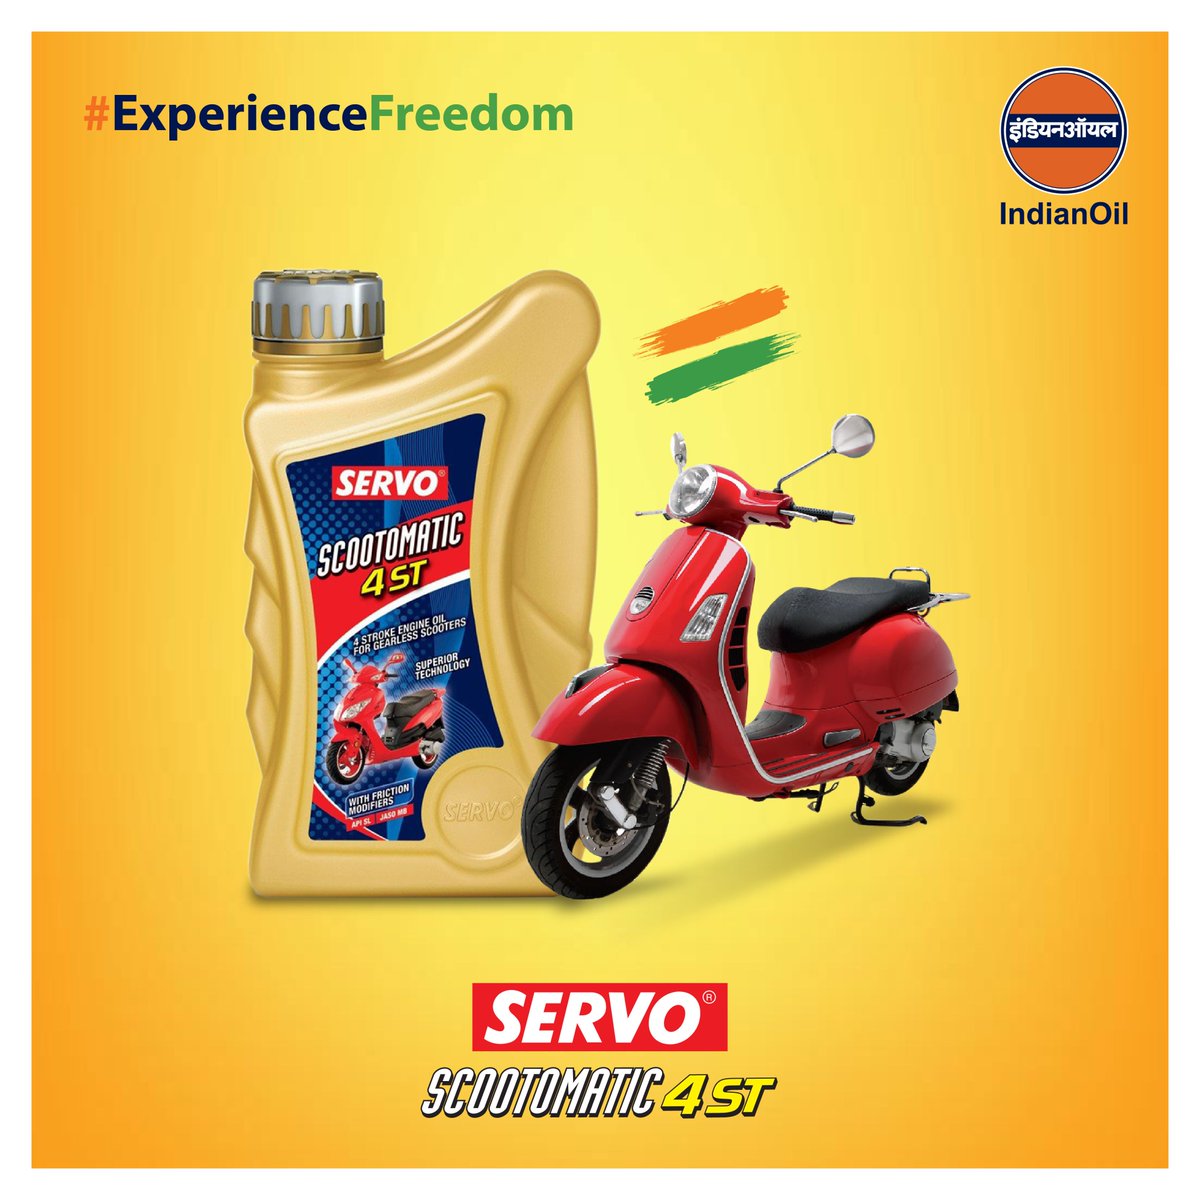 Keep your scooter fit and young, by using SERVO SCOOTOMATIC 4ST 
#ExperienceFreedom #IndependenceDayIndia2020 
@IndianOilcl @Honda @Maruti_Corp @tvsmotorcompany